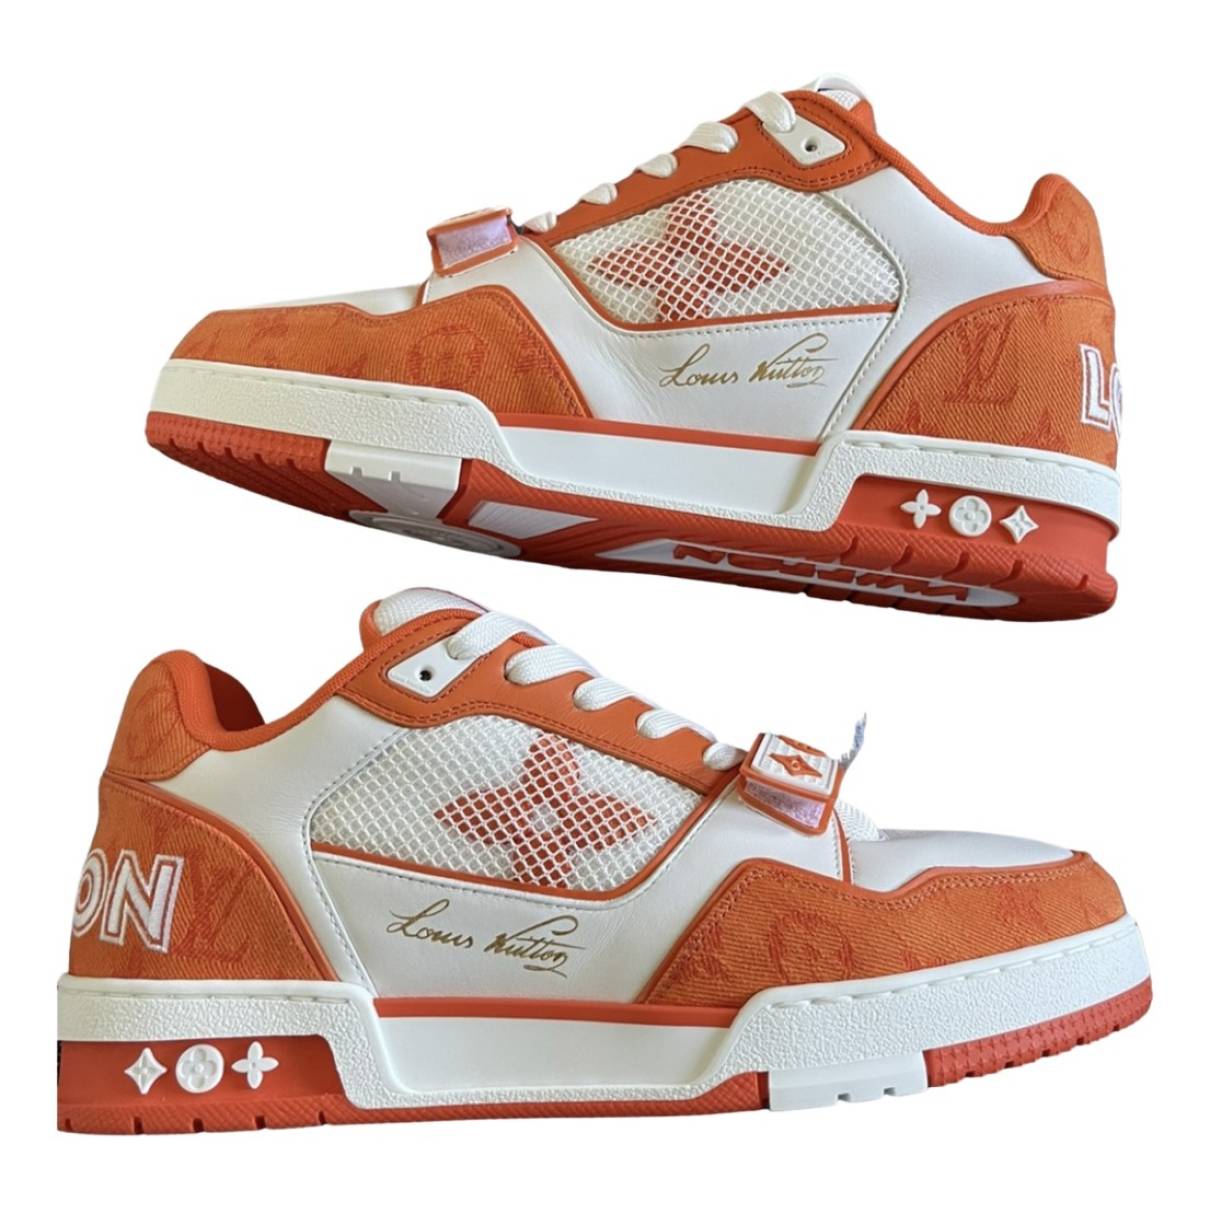 Lv trainer low trainers Louis Vuitton Orange size 8 US in Other